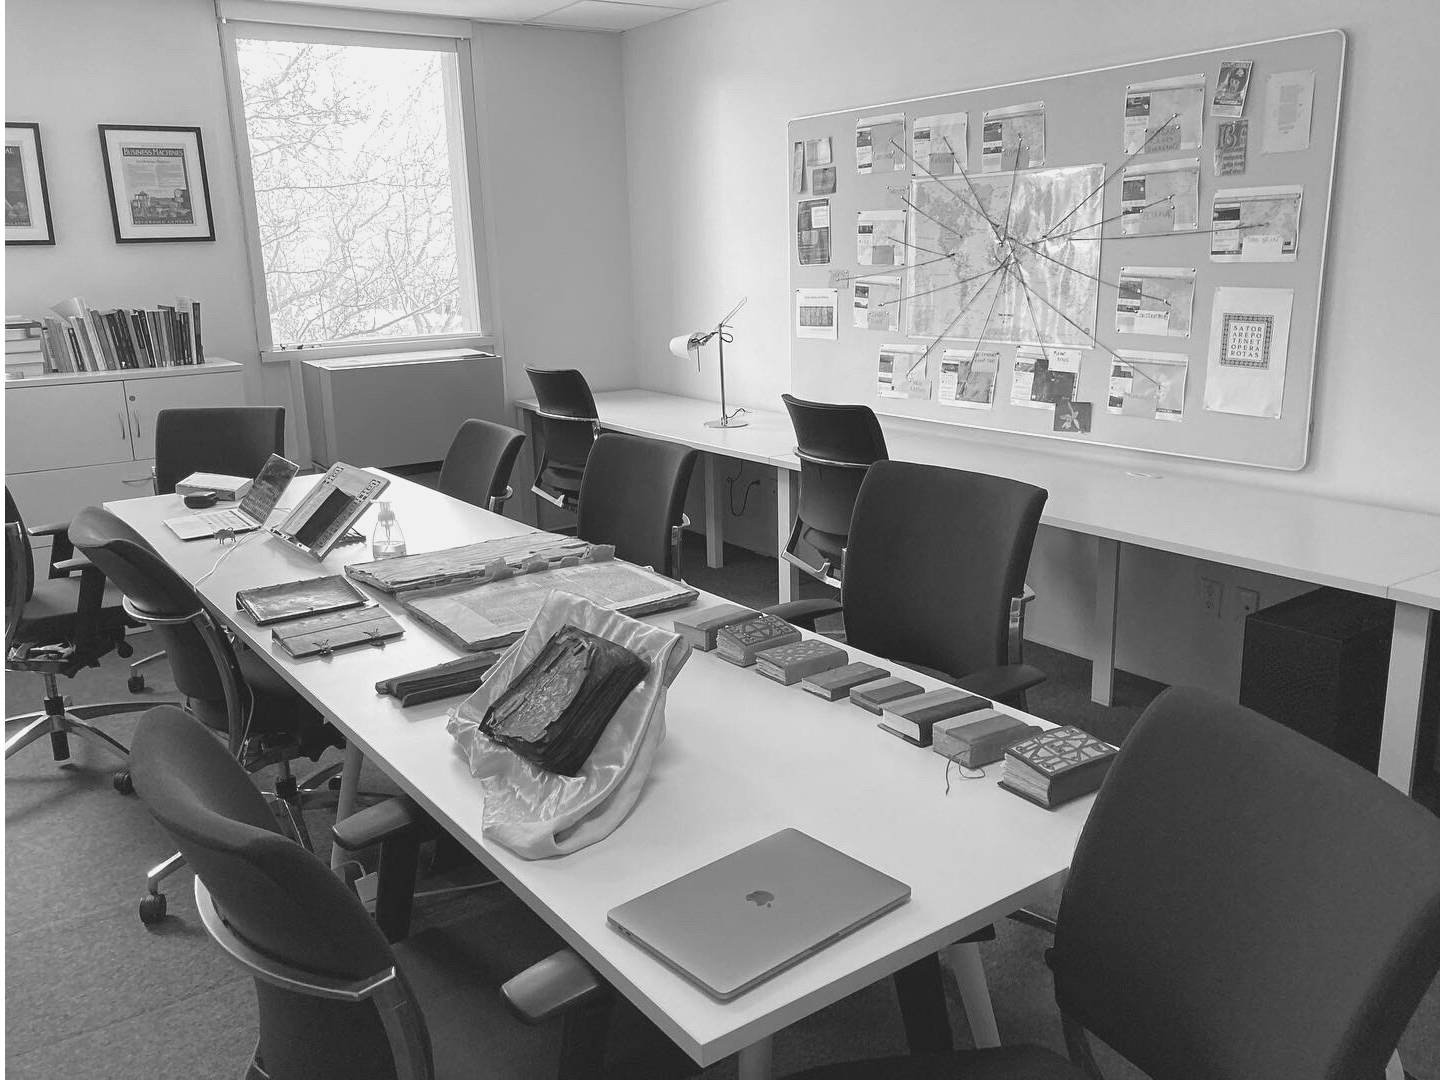 JHI space features a large table in the centre of the room with materials displayed on it. Black and white photo.